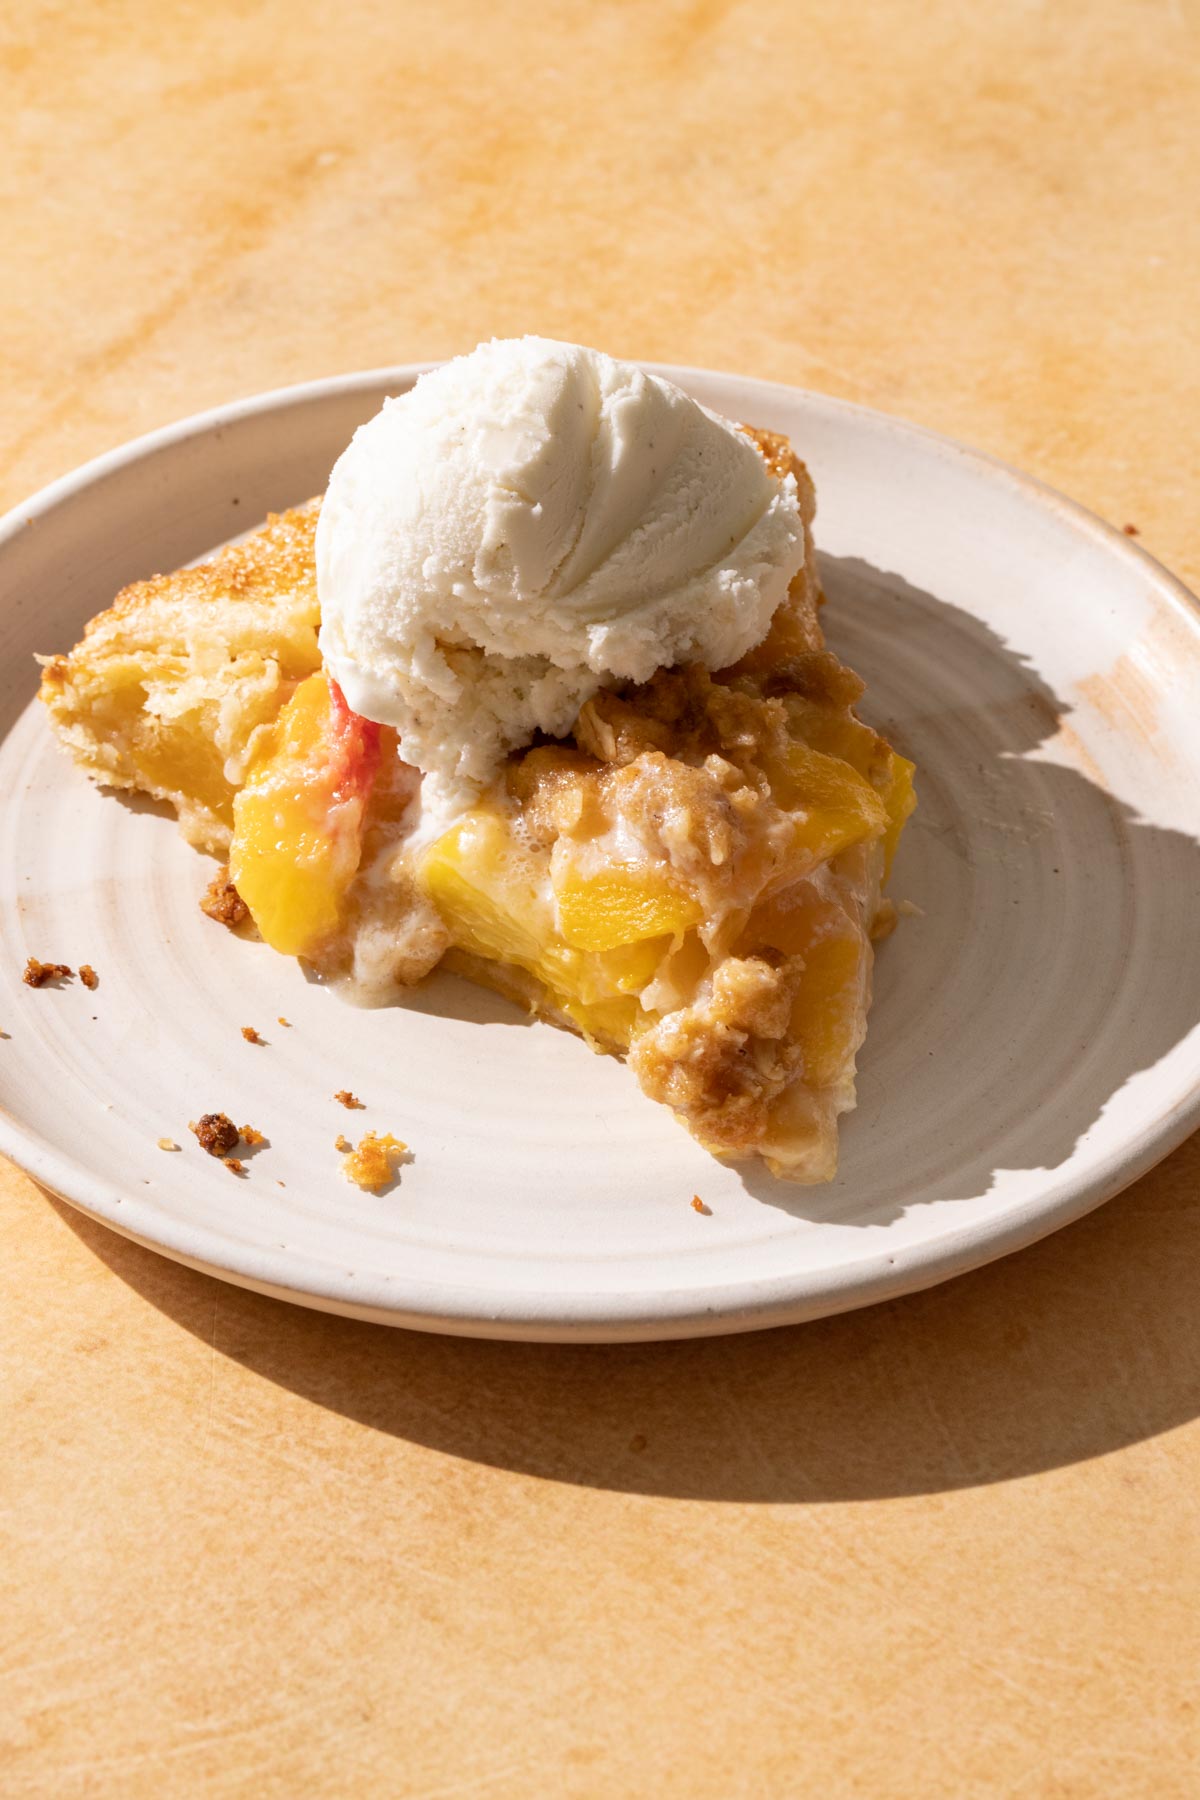 A slice of peach crostata and a scoop of ice cream on a plate